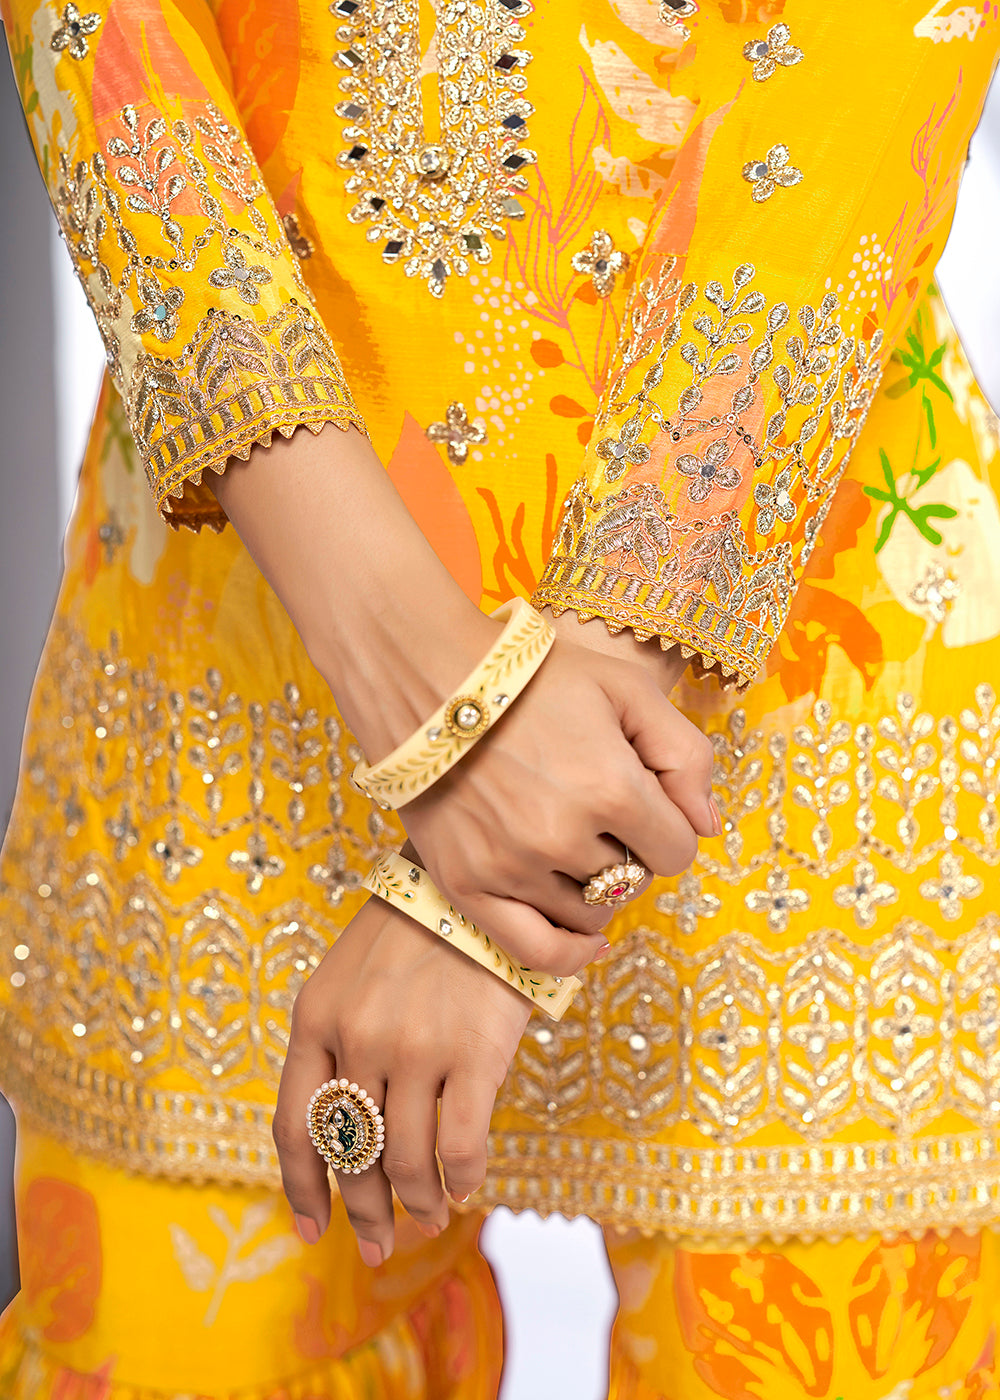 Shop Now Maize Yellow Embroidered & Printed Festive Gharara Suit Online at Empress Clothing in USA, UK, Canada, Italy & Worldwide.